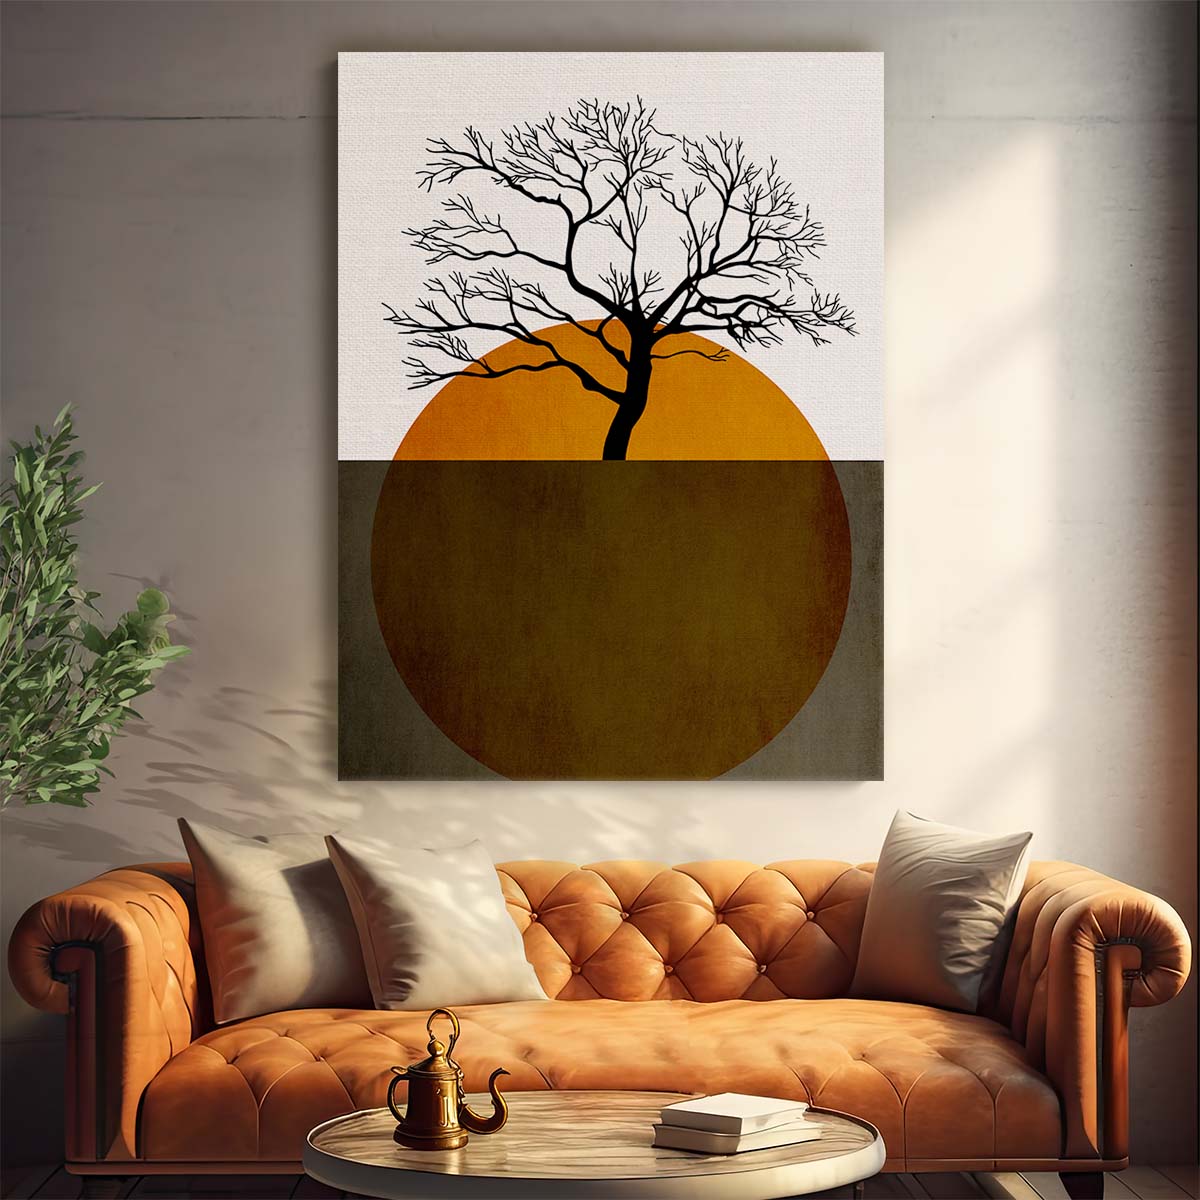 Winter Tree Silhouette Illustration Art by Kubistika, Nature Landscape by Luxuriance Designs, made in USA